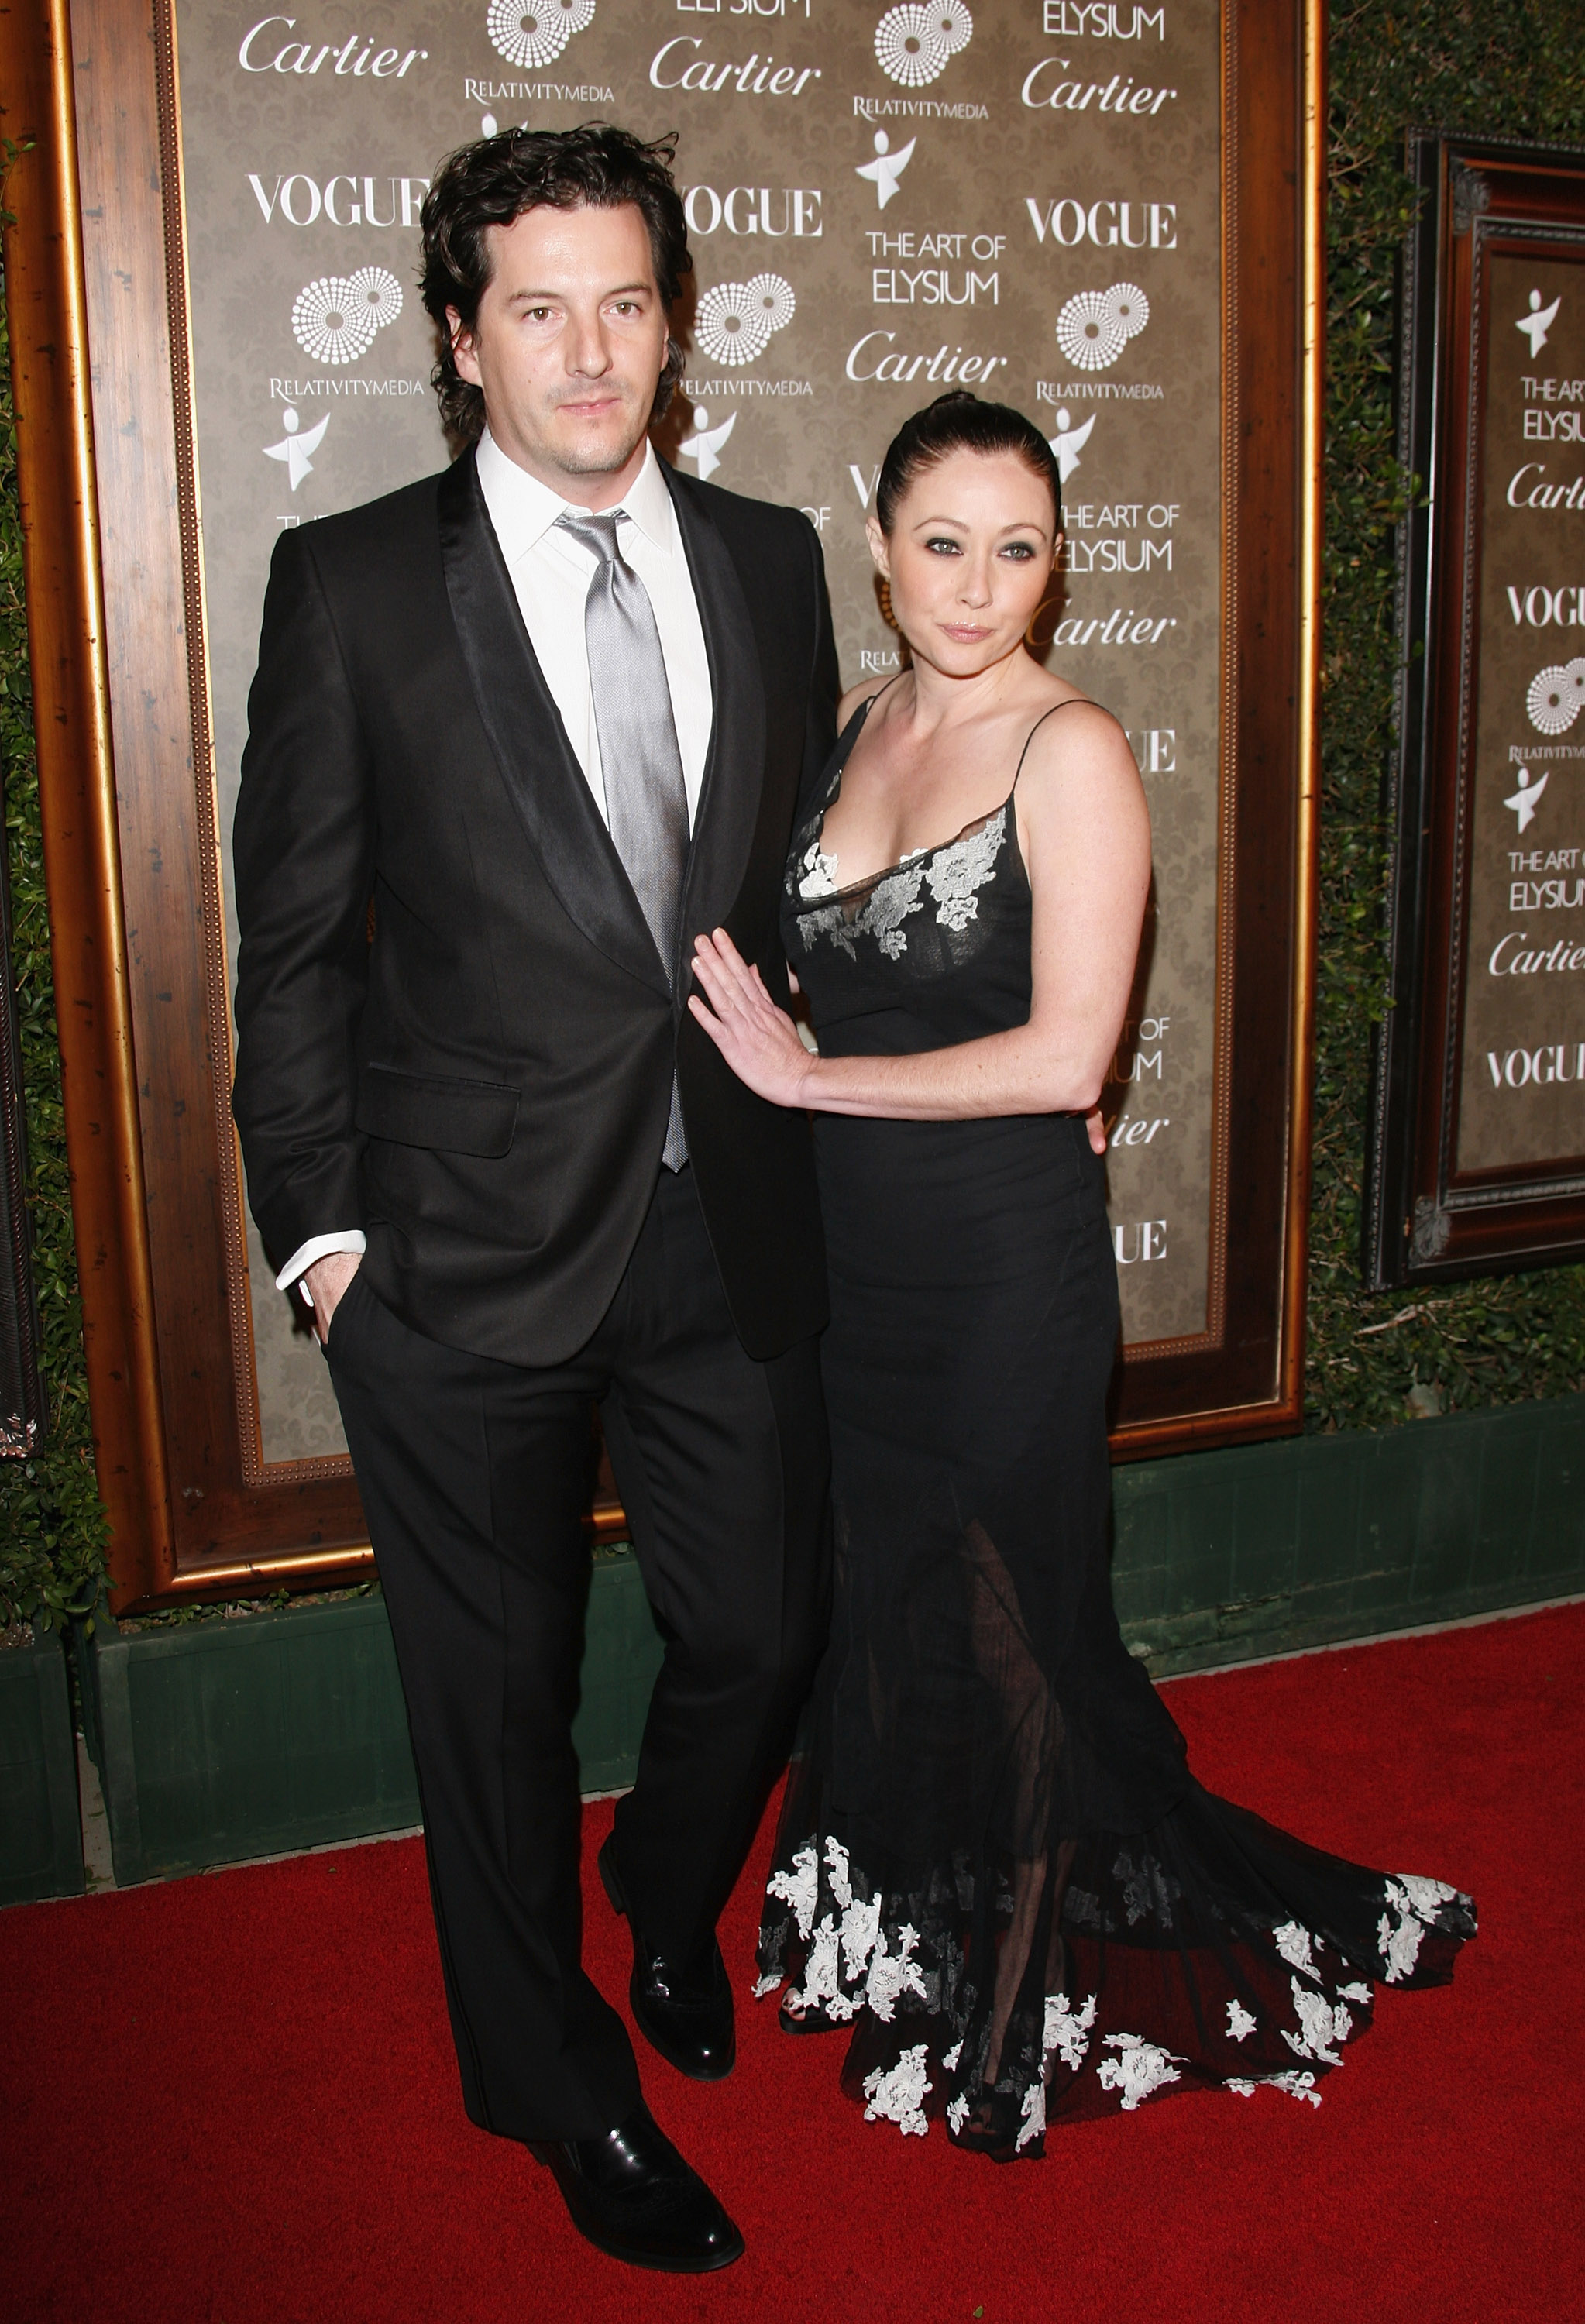 Shannen Doherty and Kurt Iswarienko arrive at the Art of Elysium 2nd Annual Heaven Gala held at Vibiana in Los Angeles, California on January 10, 2009. | Source: Getty Images